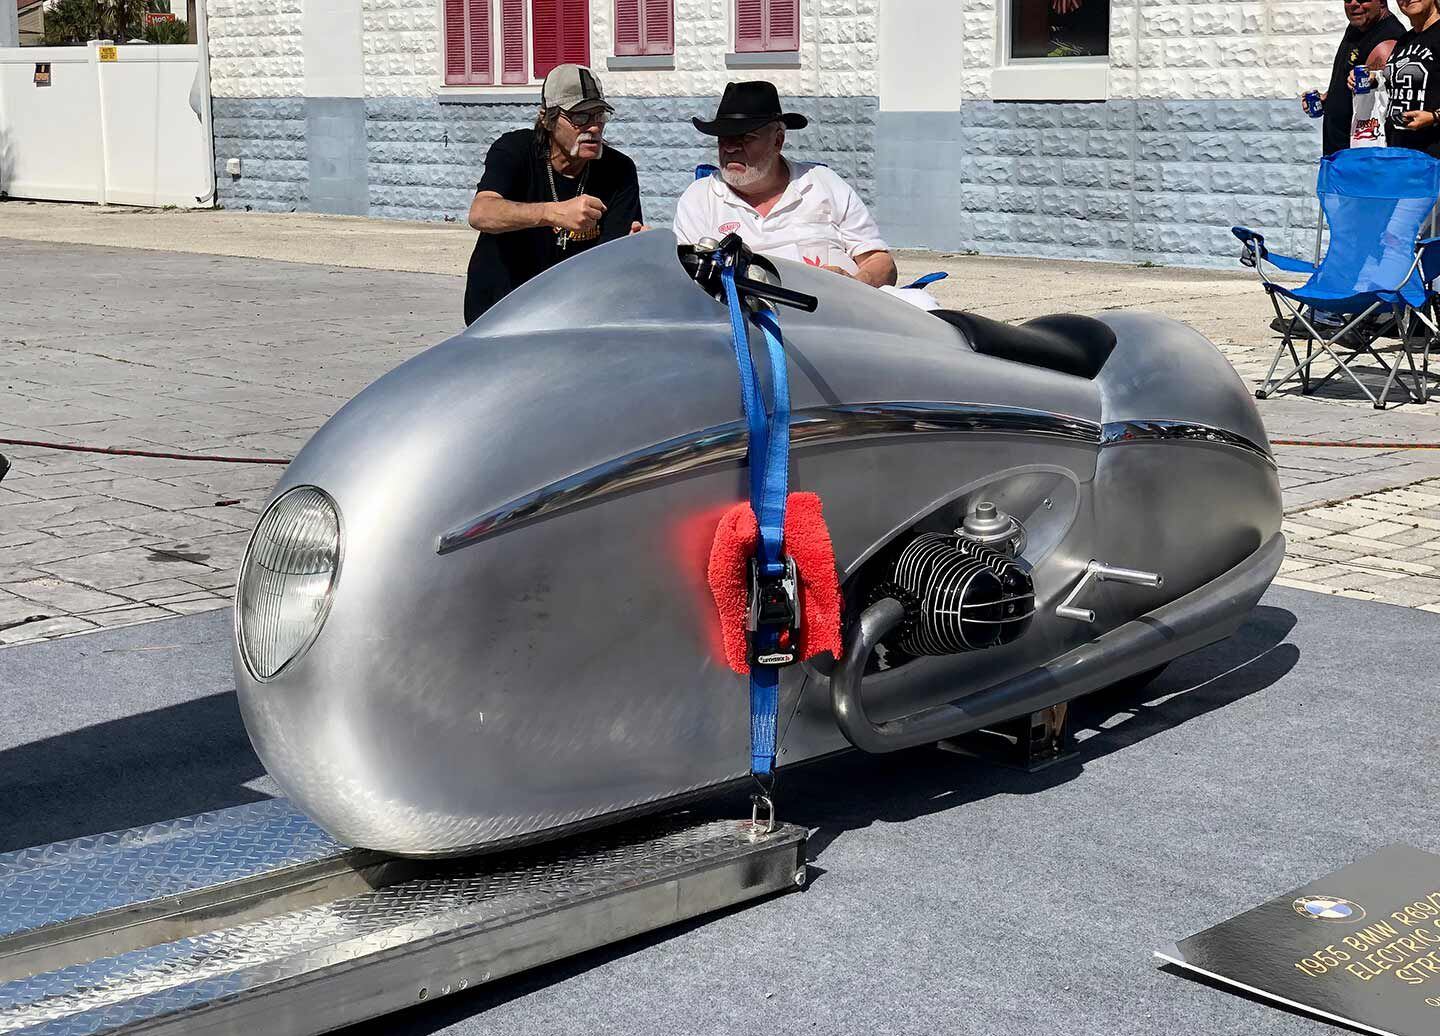 Underneath that aluminum body we’re told there’s a 1955 BMW R69/75 electric-start streamliner fabricated by panel-beater Kyle Yocum of Yocum’s Signature Hot Rods.